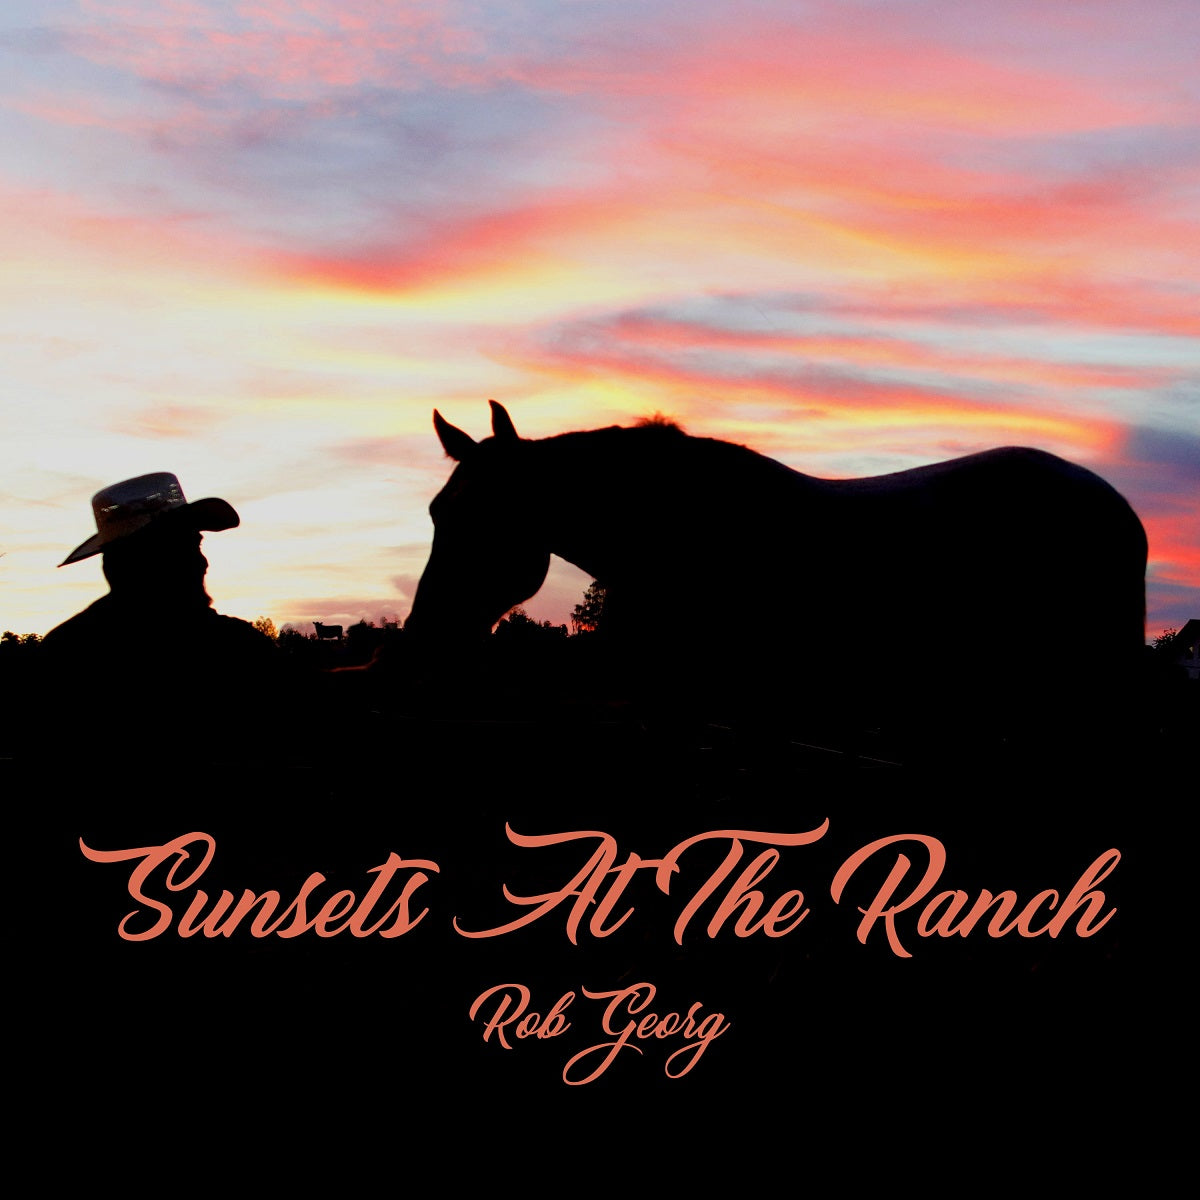 Rob Georg – ‘Sunsets At The Ranch’